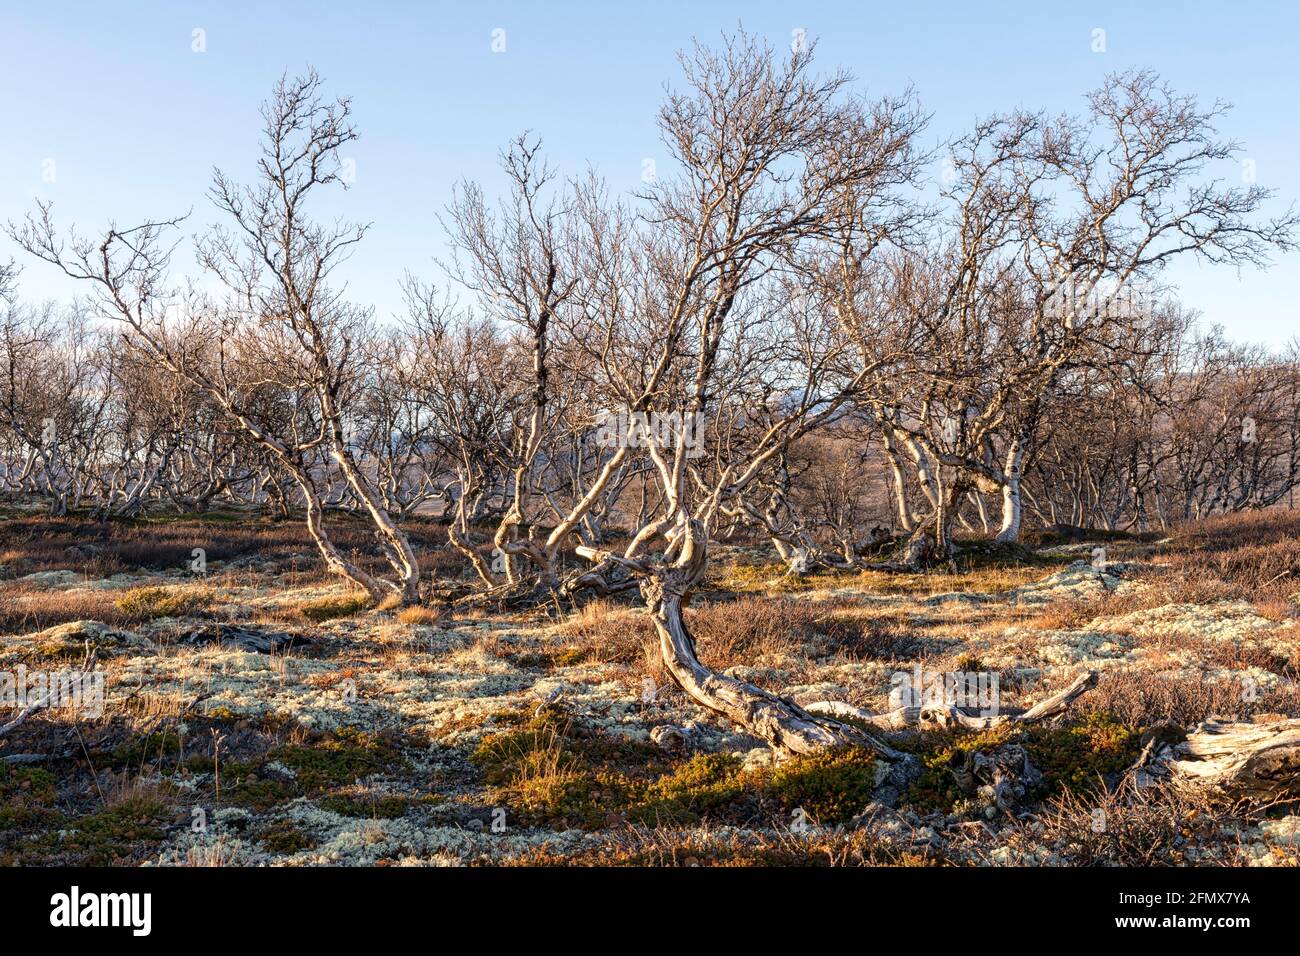 In late autumn, a group of leafless birches (Betula pubescens) near Pilegrimsleden in the evening sun. Pilgrim's route, Dovre Nationalpark, Norway Stock Photo